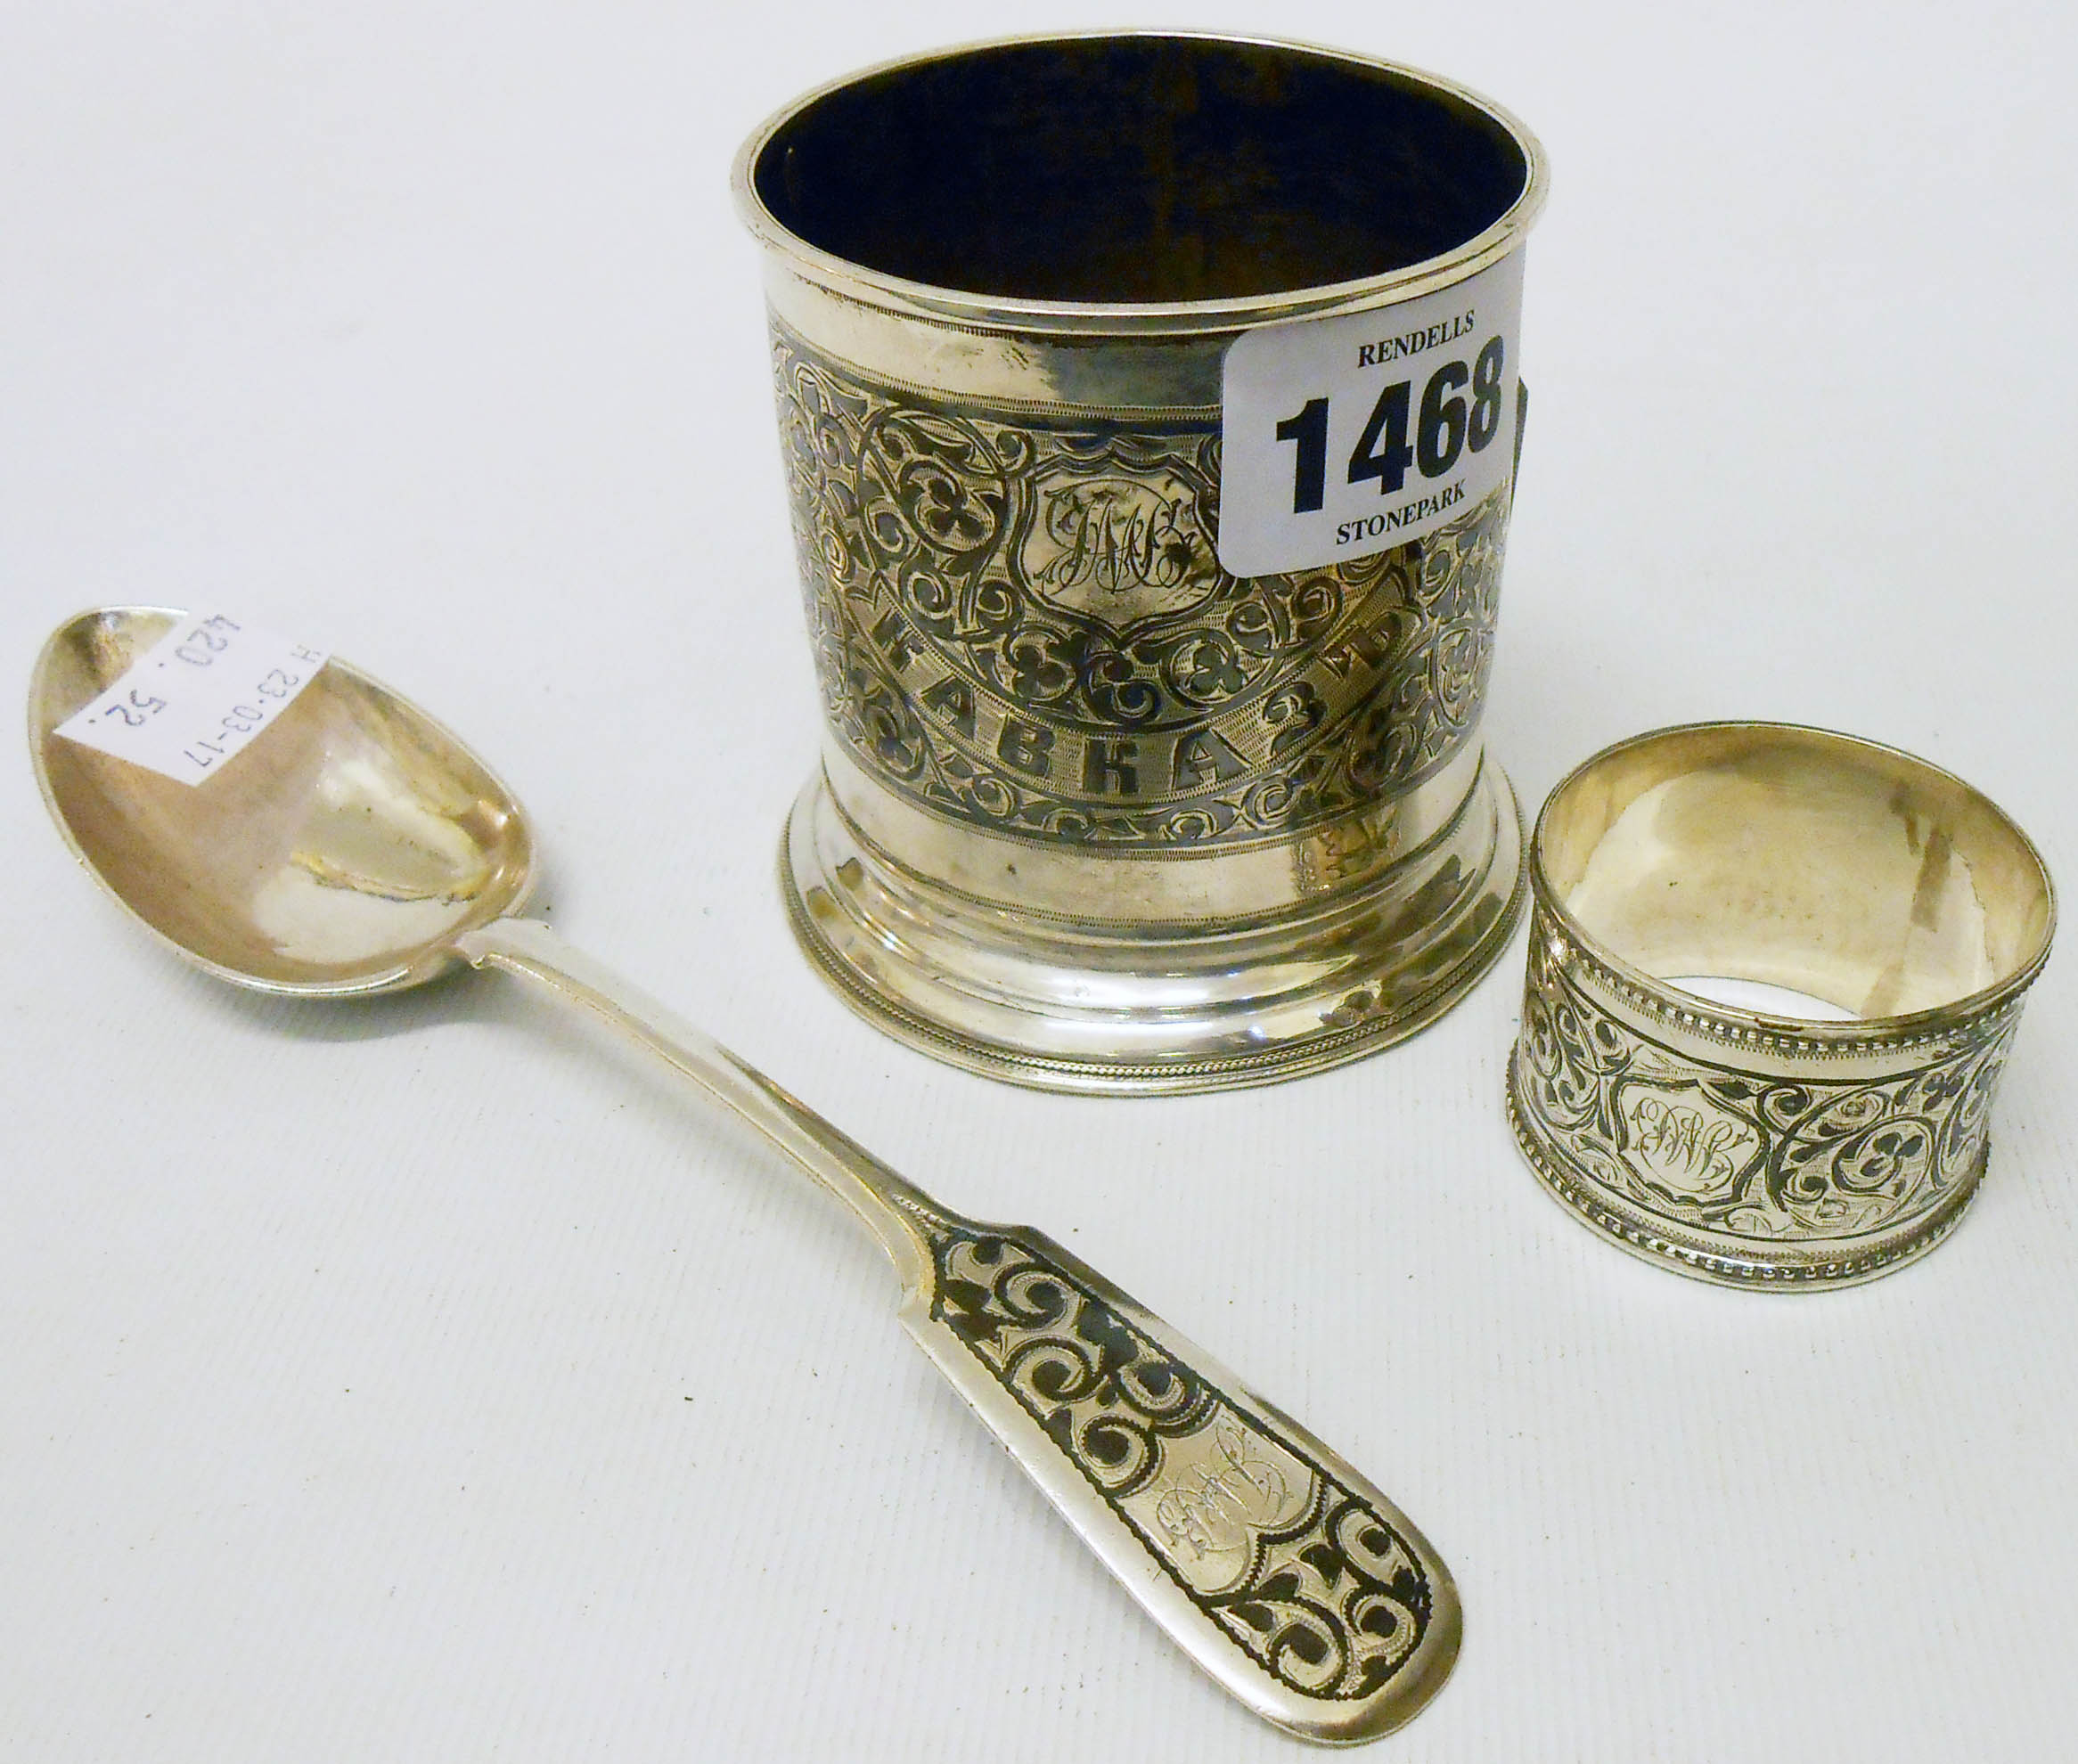 A Russian Neillo work beaker and Karkaz napkin ring - St. Petersburg 1899 -1908 - sold with a